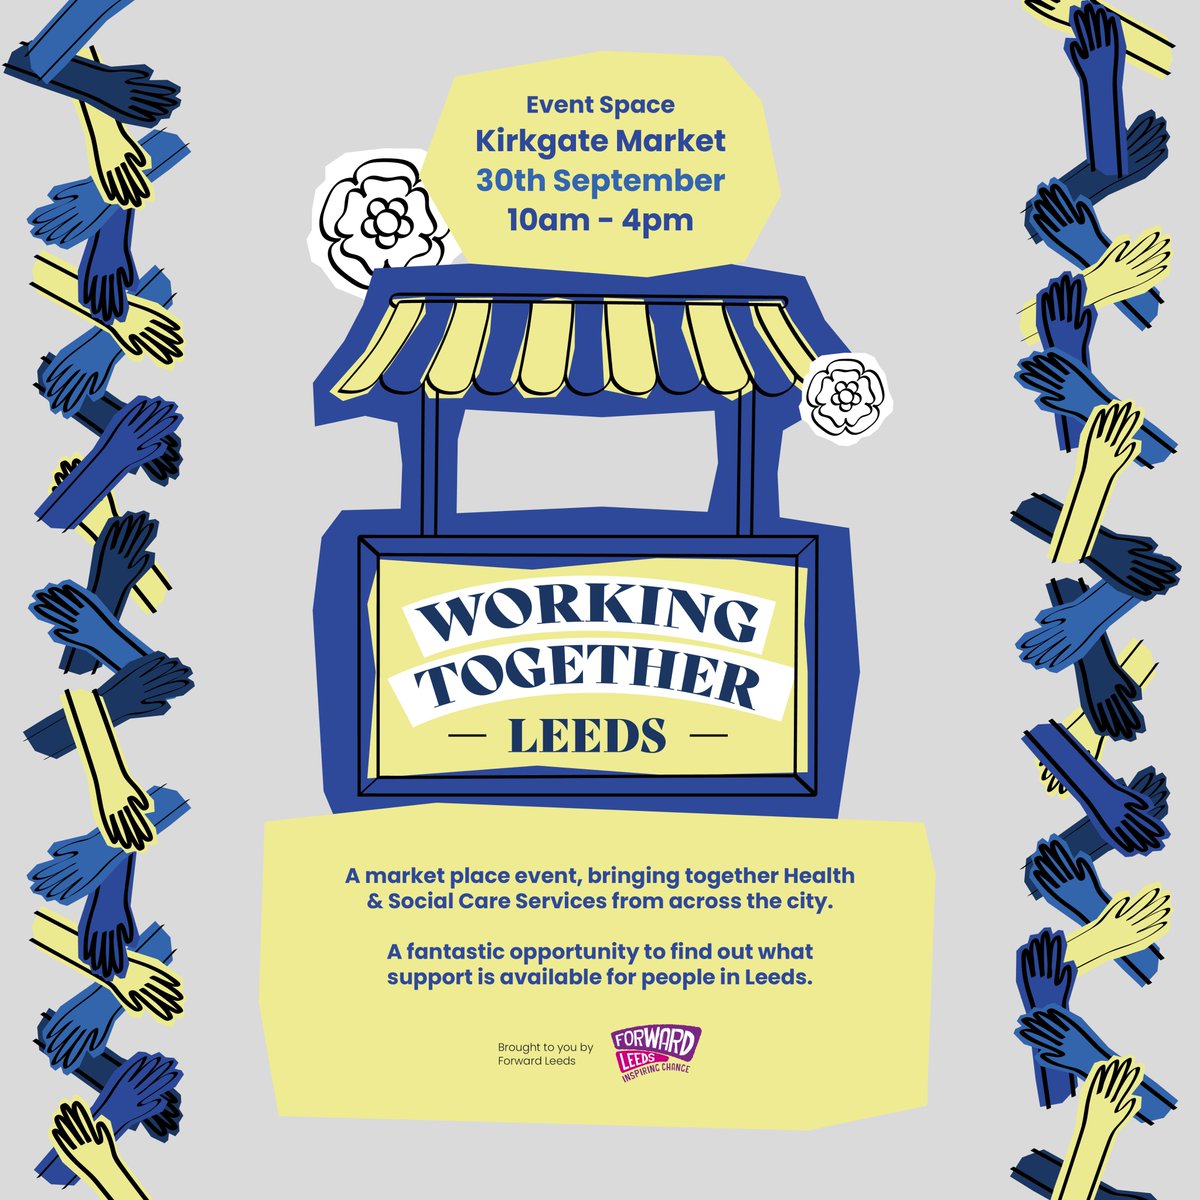 Everyone's busy. The world of health and social services seems like it's constantly changing. It's hard to keep up-to-date with what's out there. So we've organised an event for staff at services across Leeds to quickly and easily learn about other services in the city.